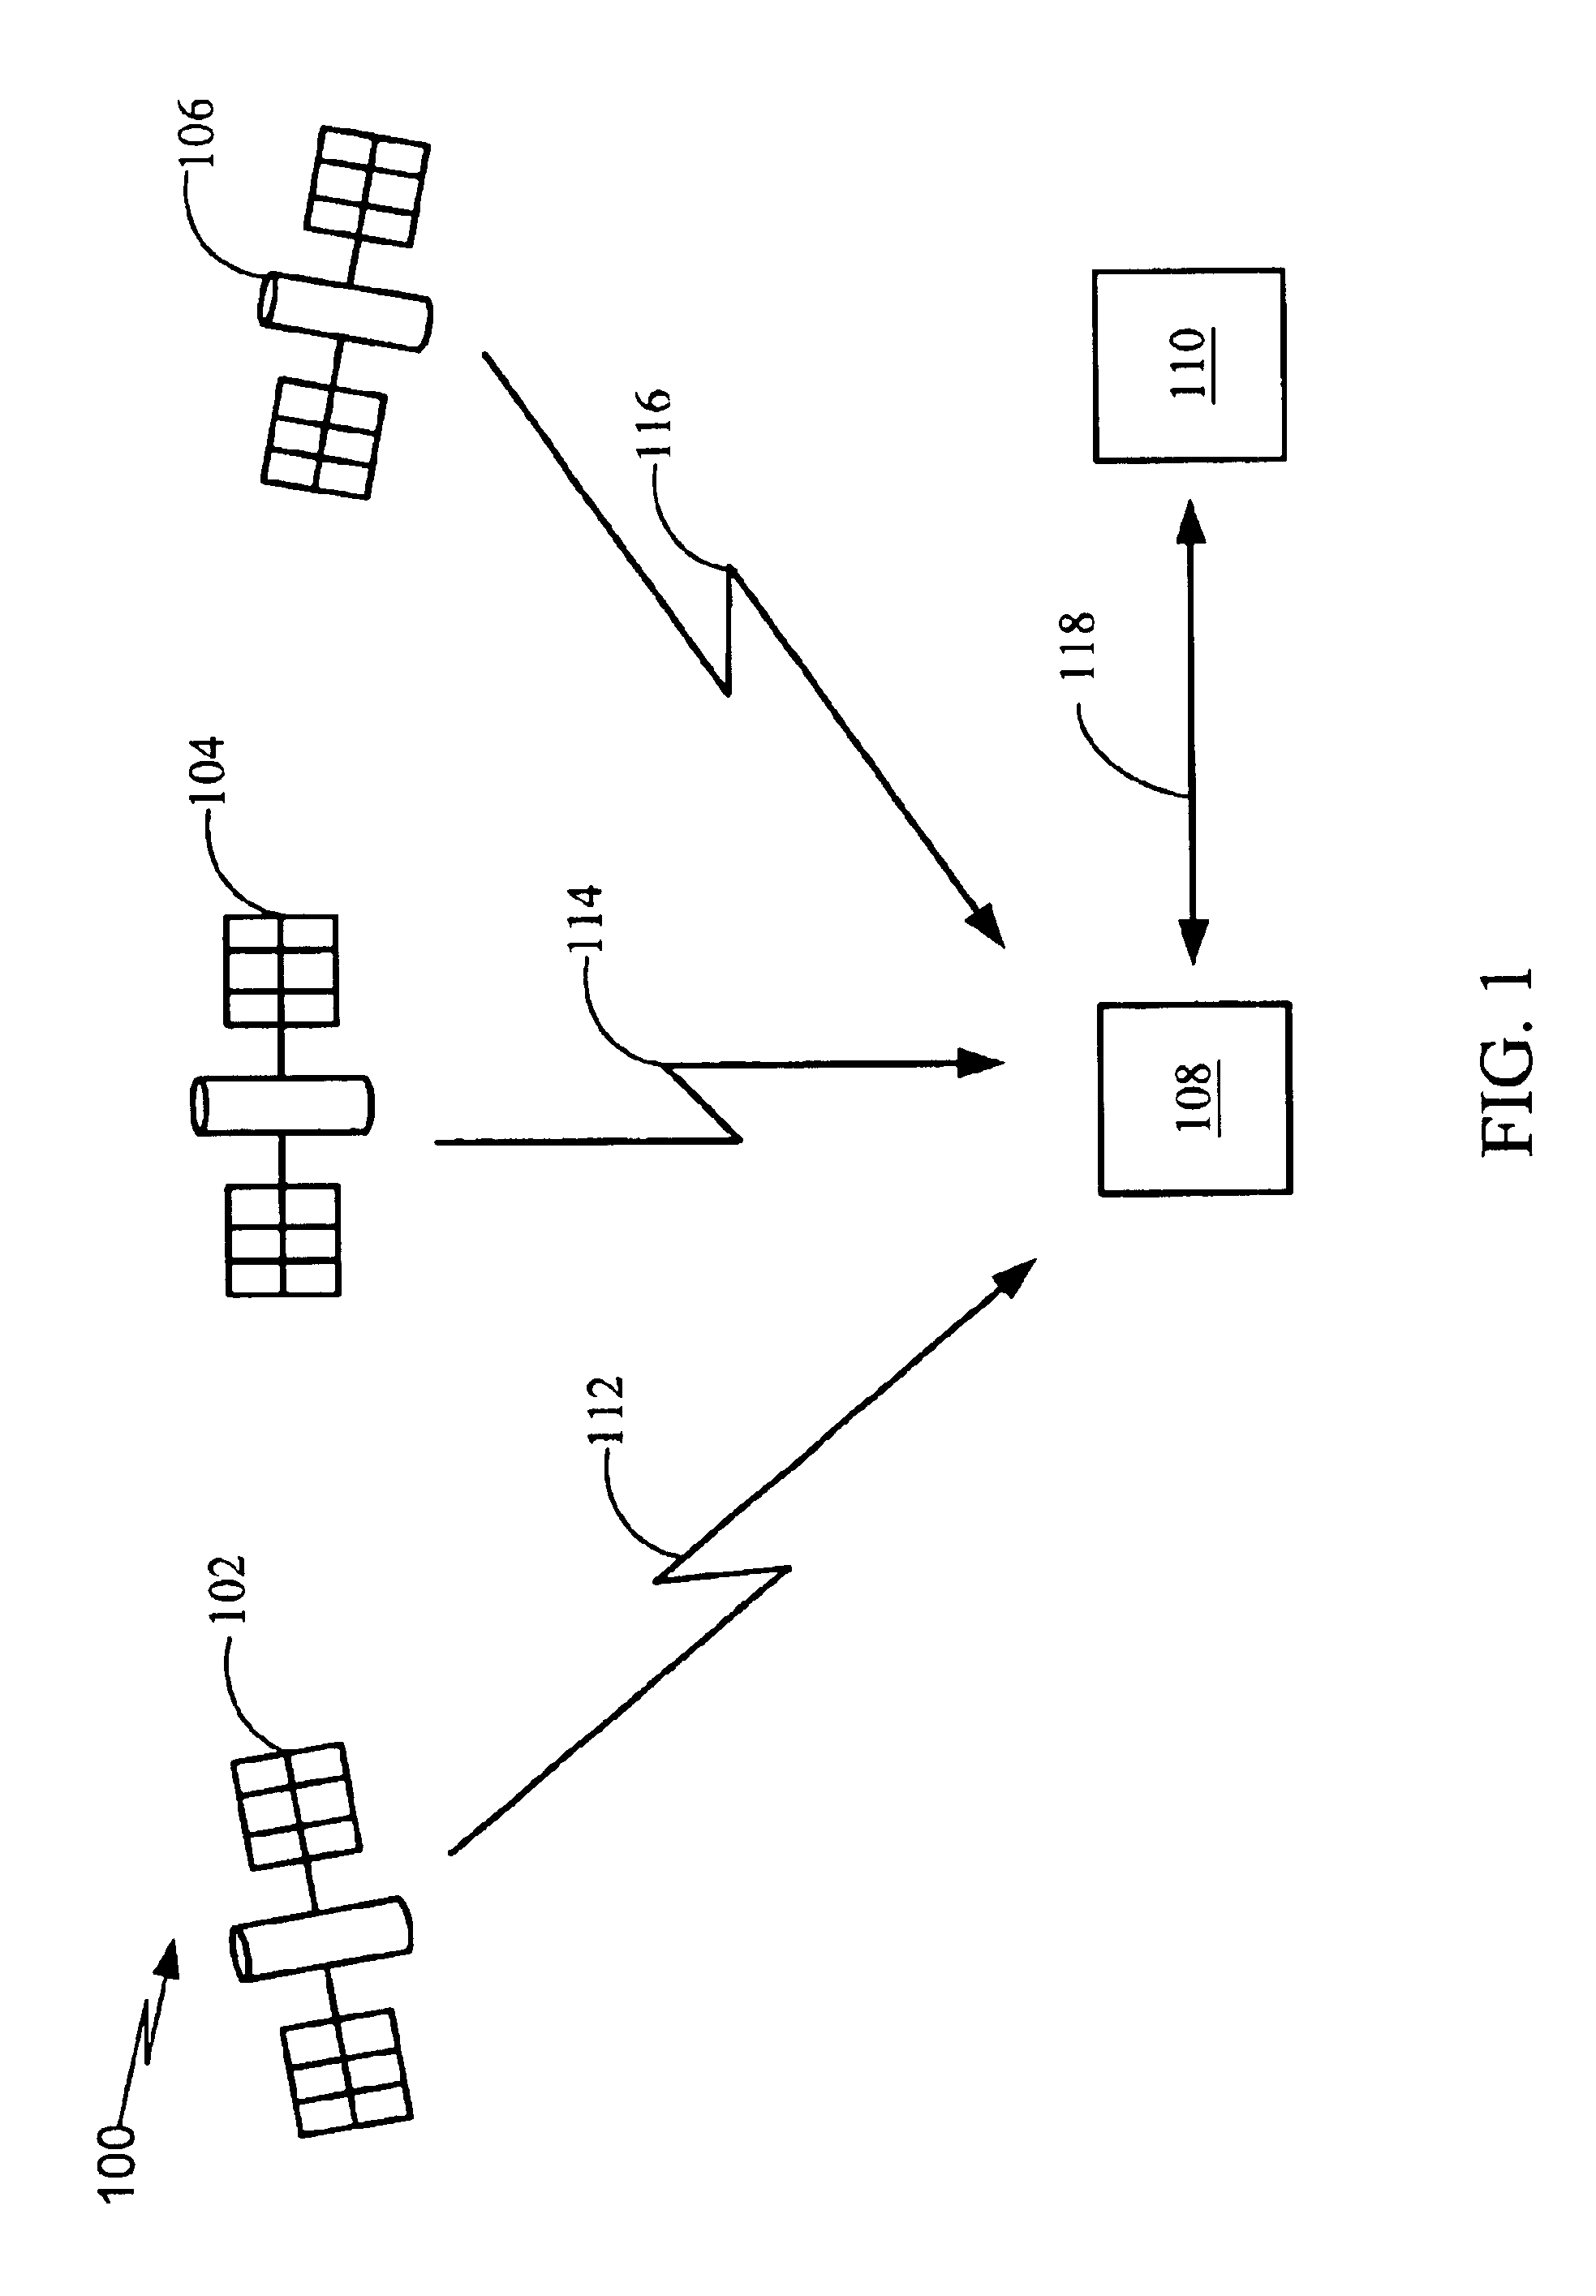 Generic satellite positioning system receivers with programmable inputs